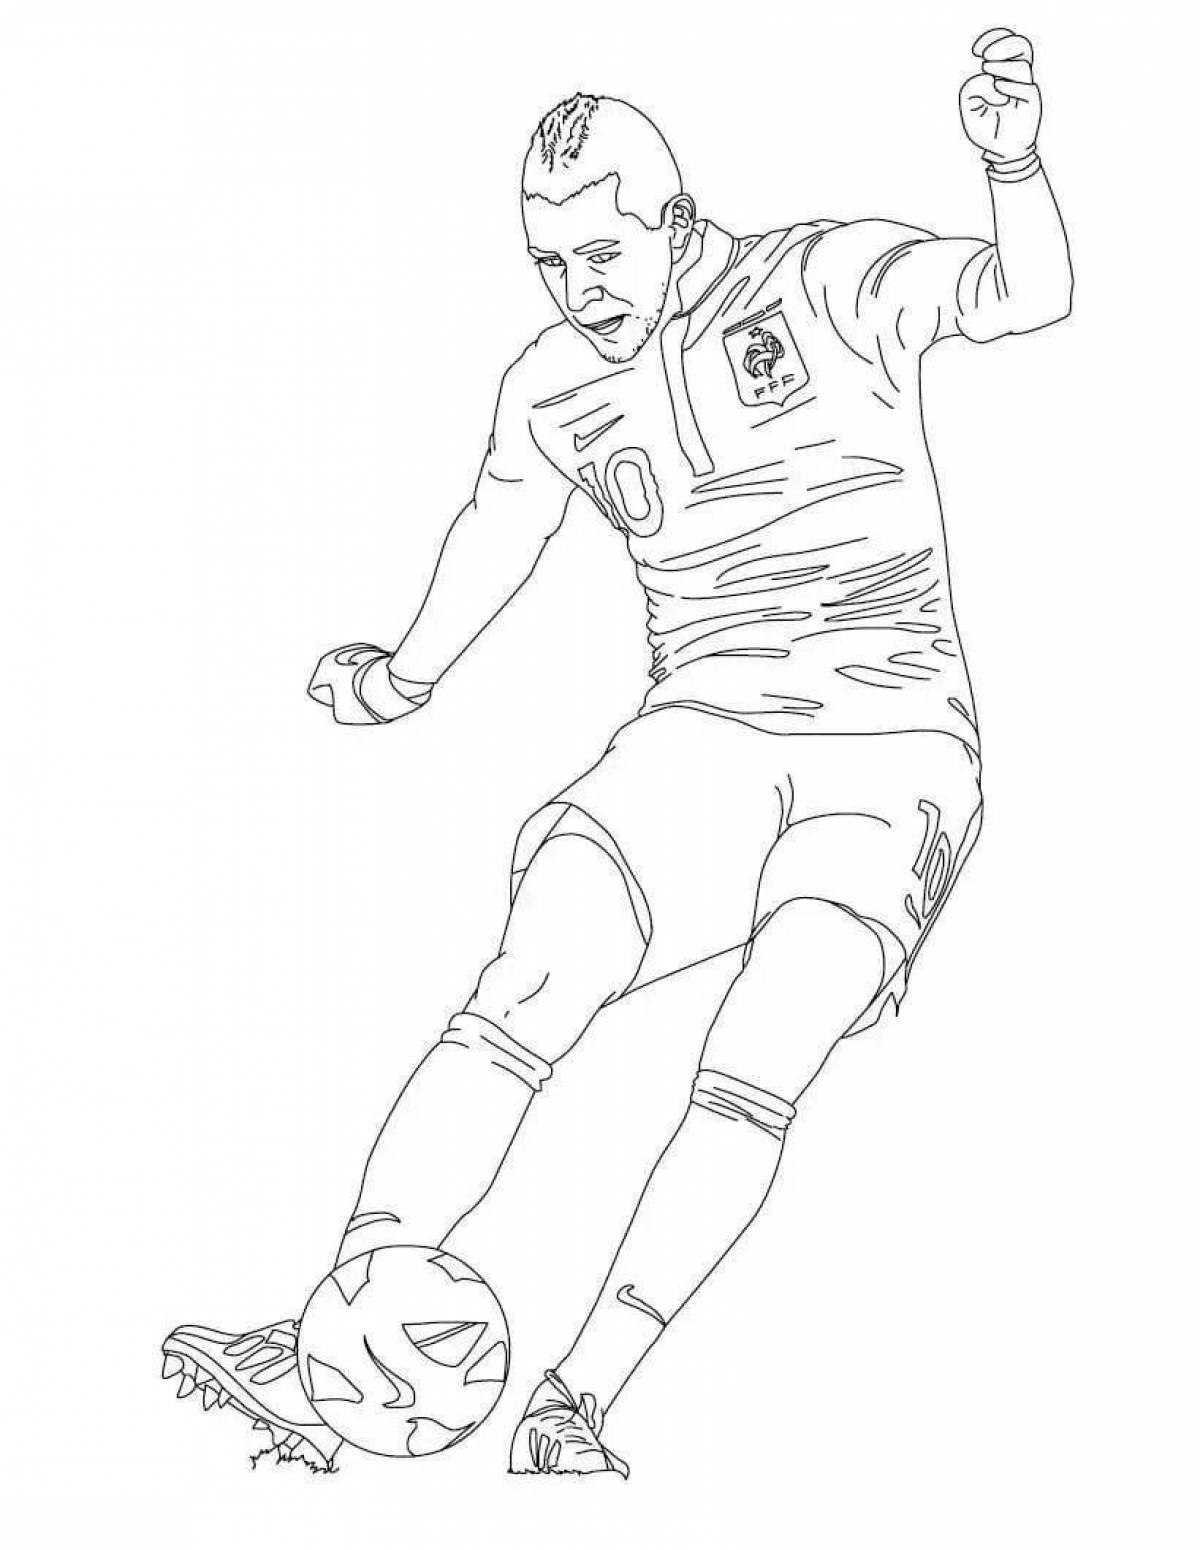 Exquisite soccer player coloring book